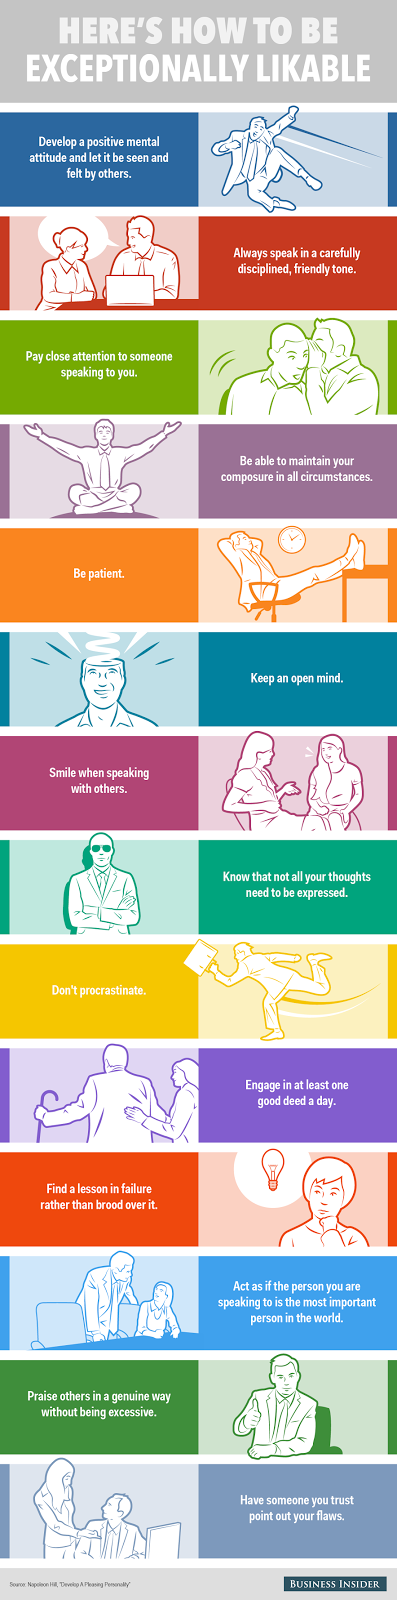 Habits of exceptionally likable people